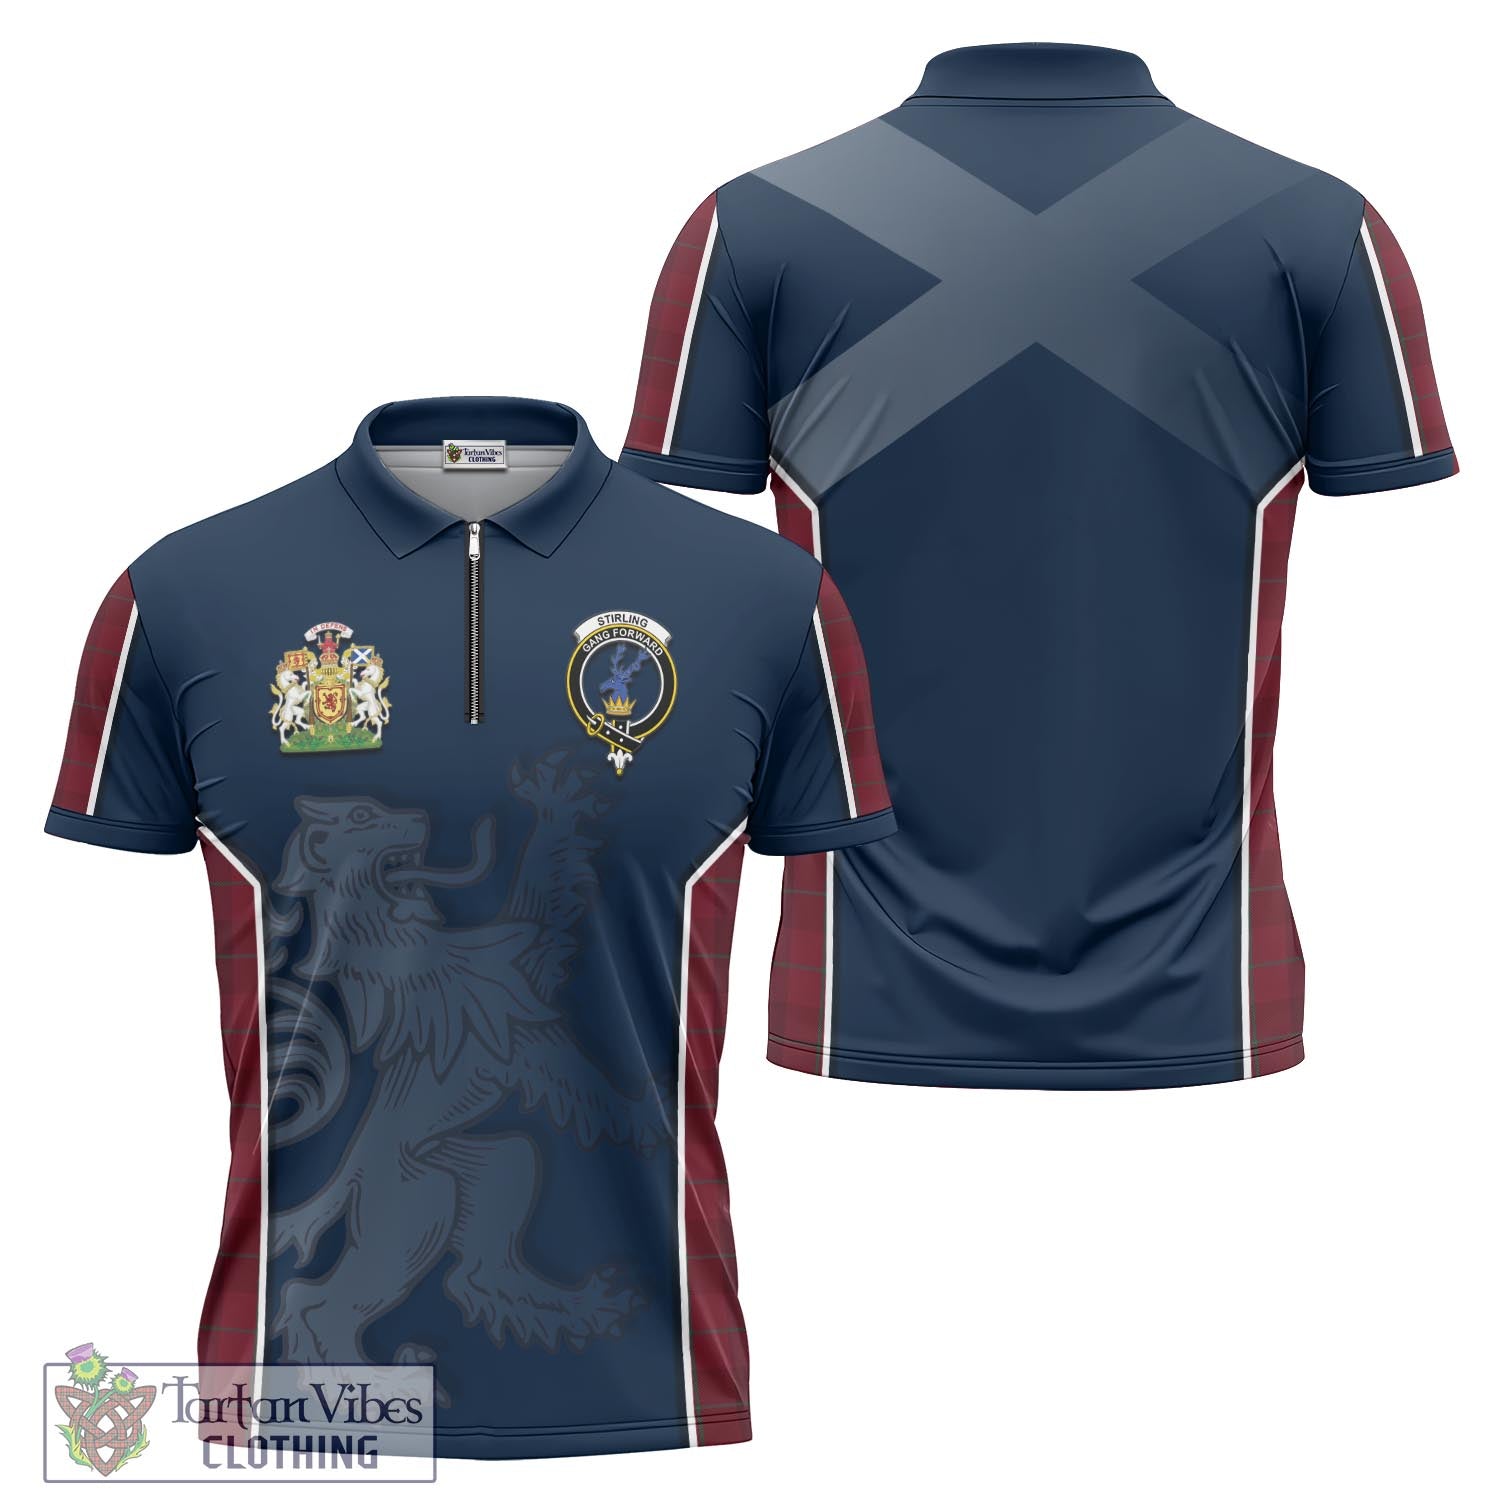 Tartan Vibes Clothing Stirling of Keir Tartan Zipper Polo Shirt with Family Crest and Lion Rampant Vibes Sport Style